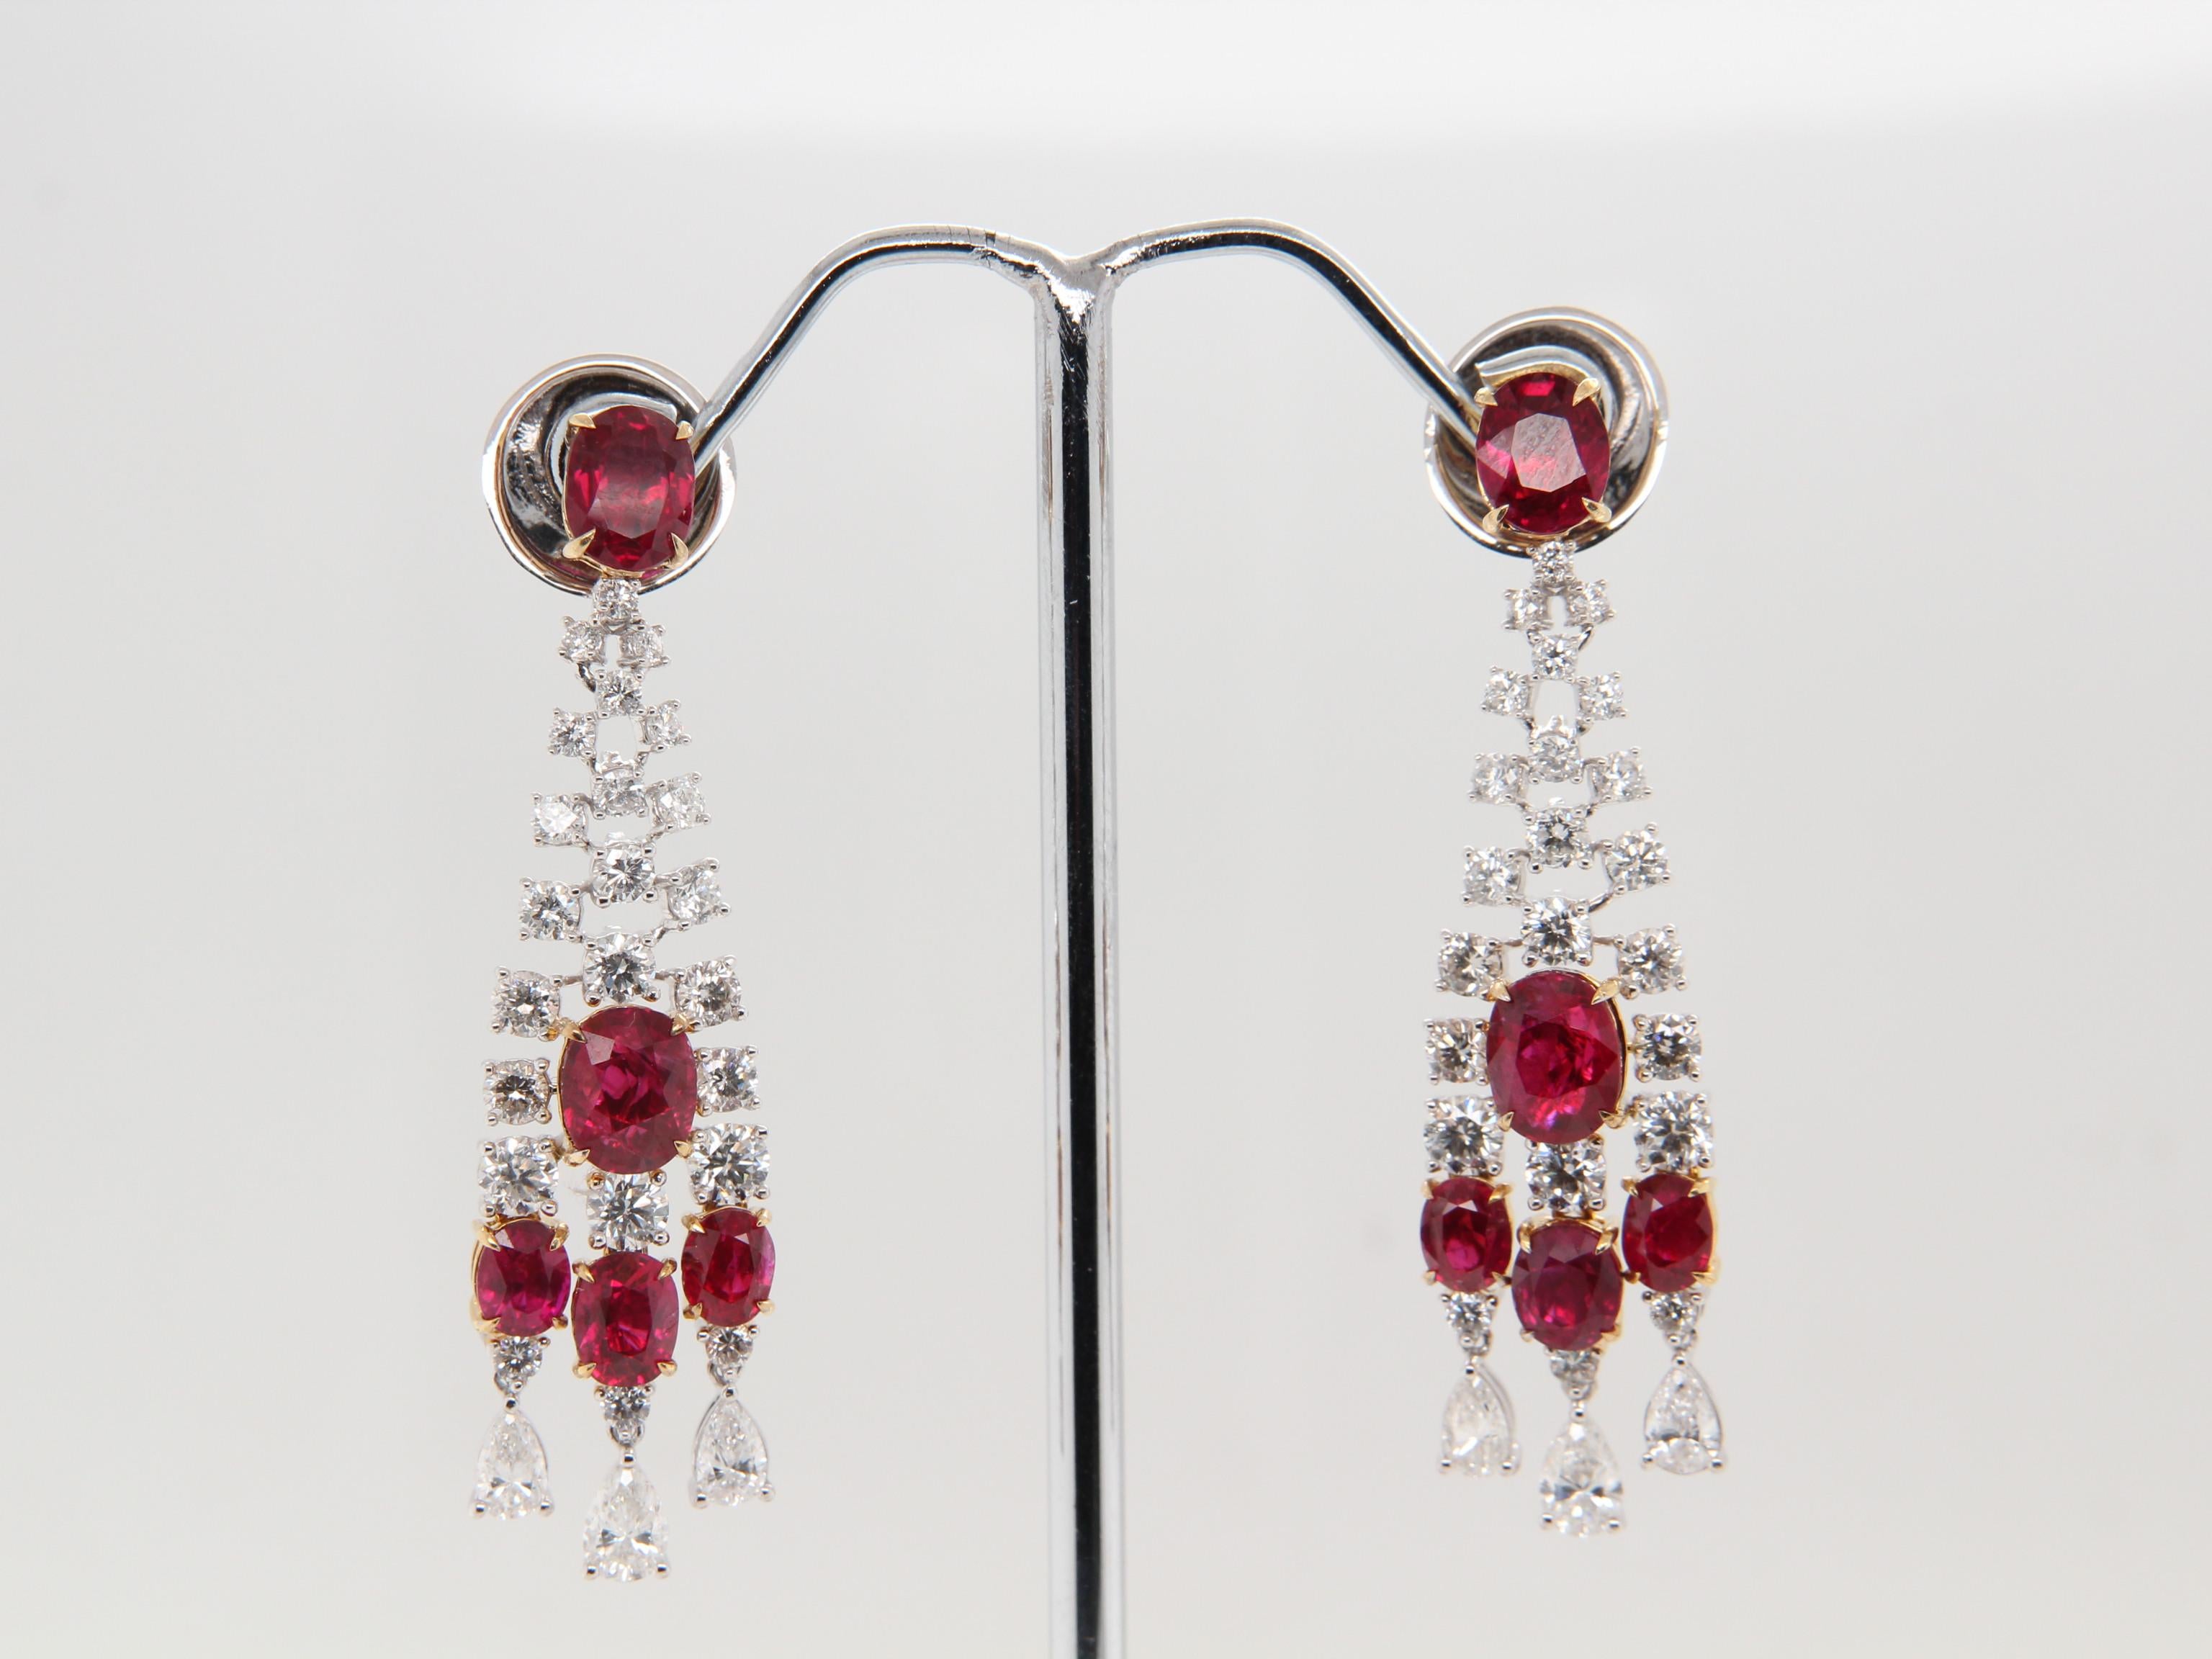 An elegant pair of vivid and lustrous pigeon blood Burmese ruby and diamond chandelier earrings. The ruby's shining luster is complimented by the sparkling diamonds, this helps to exude elegance. The ruby weighs 5.18 carat and is certified by Gem